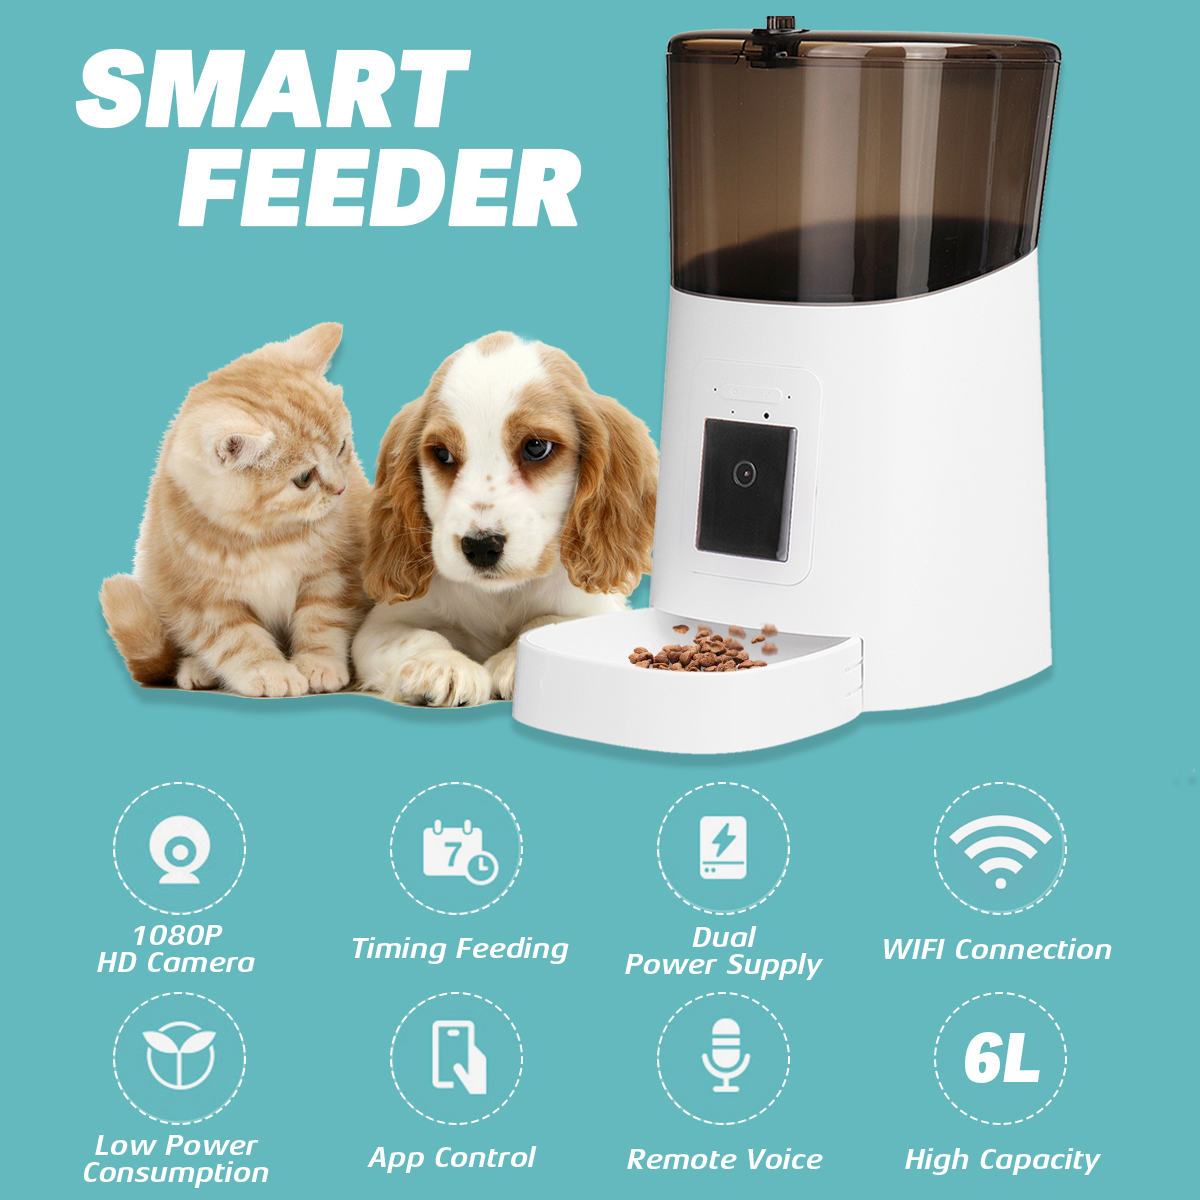 6L-Remote-Visibility-Pet-Feeder-Timing-Automatic-For-Cats-Dogs-WiFi-Intelligent-Swirl-Smart-Food-Dis-1957203-2